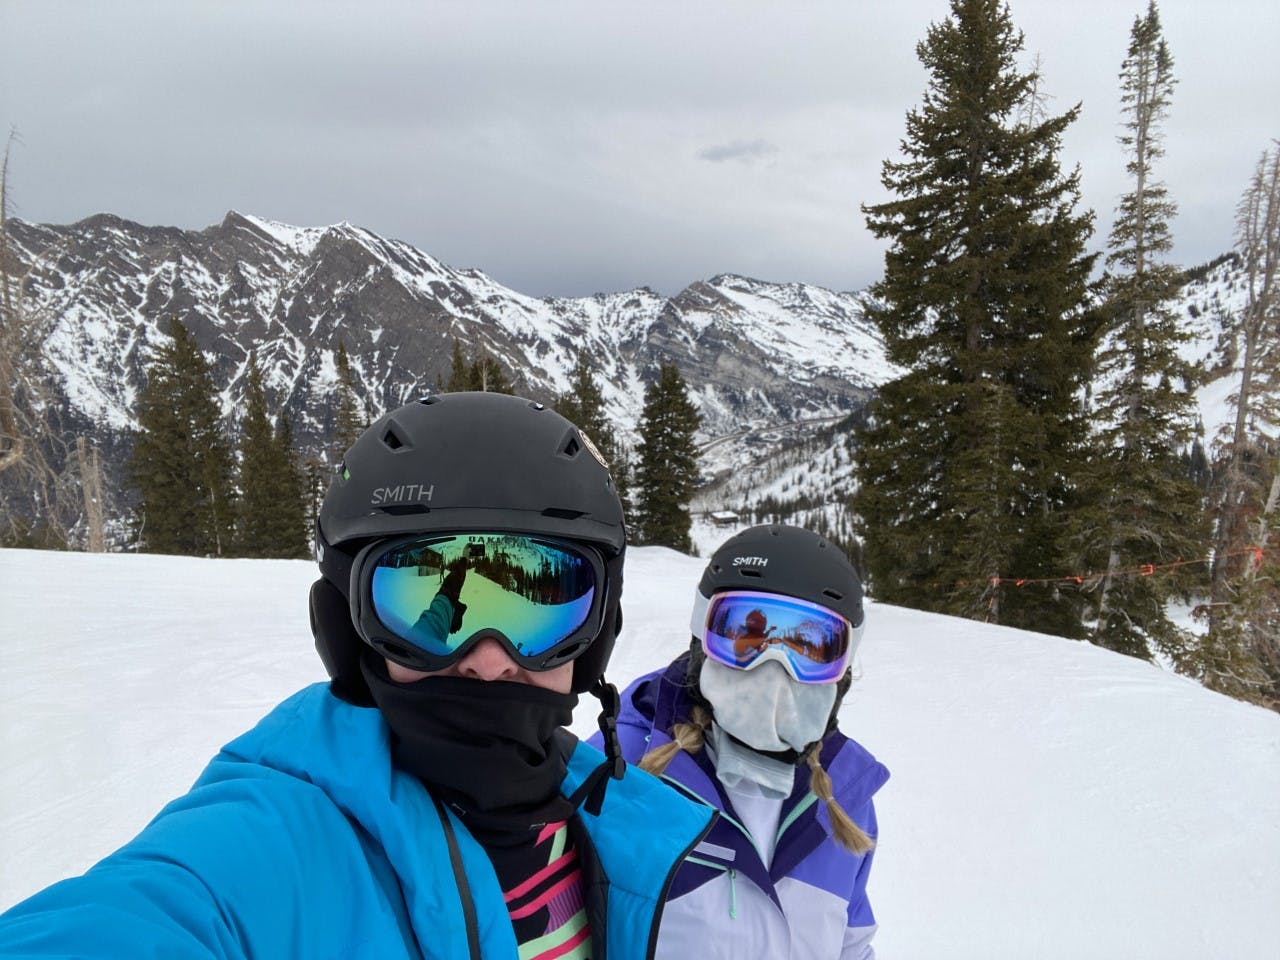 Two skiers both with helmets and goggles on pose for a photo with snowy mountains in the background. 